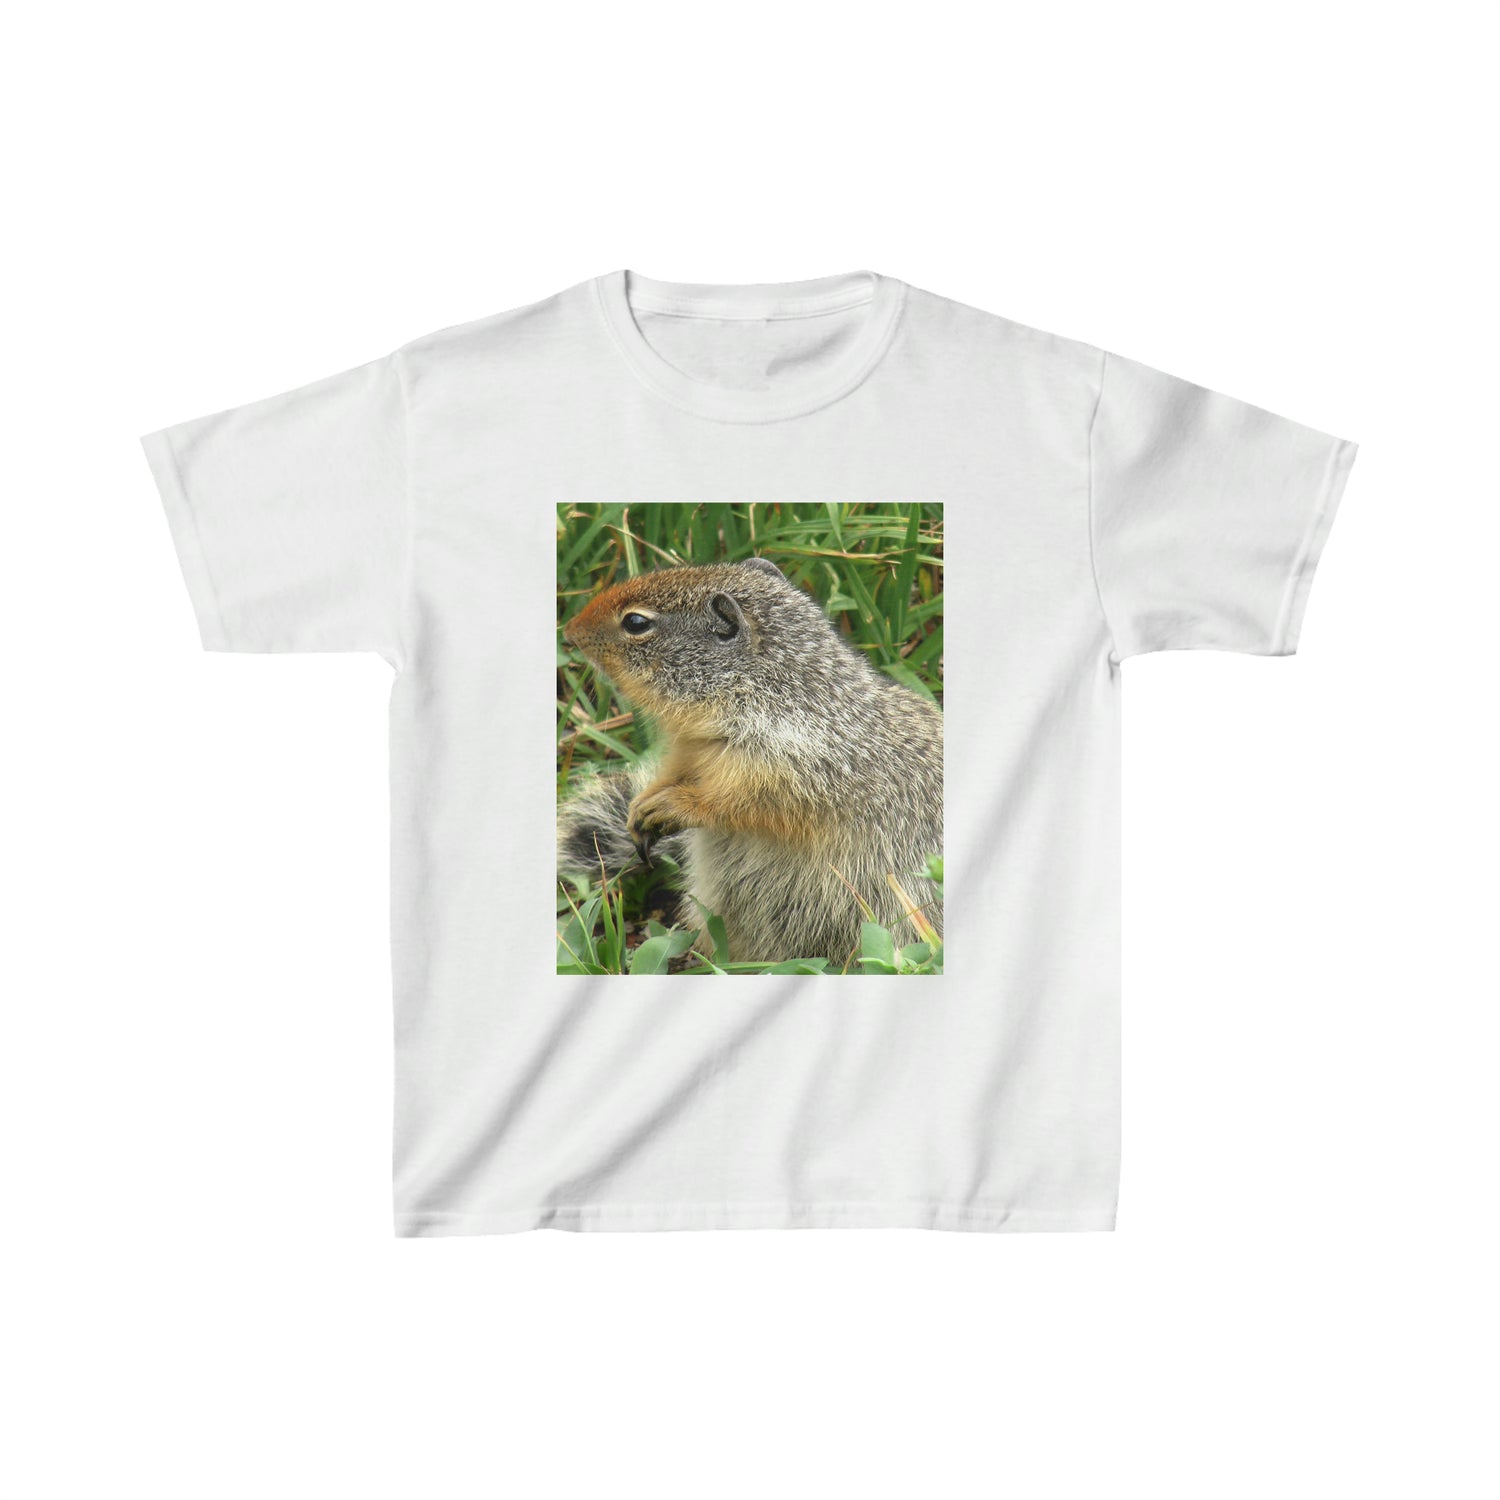 Inquisitive Stare - Kids Cotton Tee - Fry1Productions